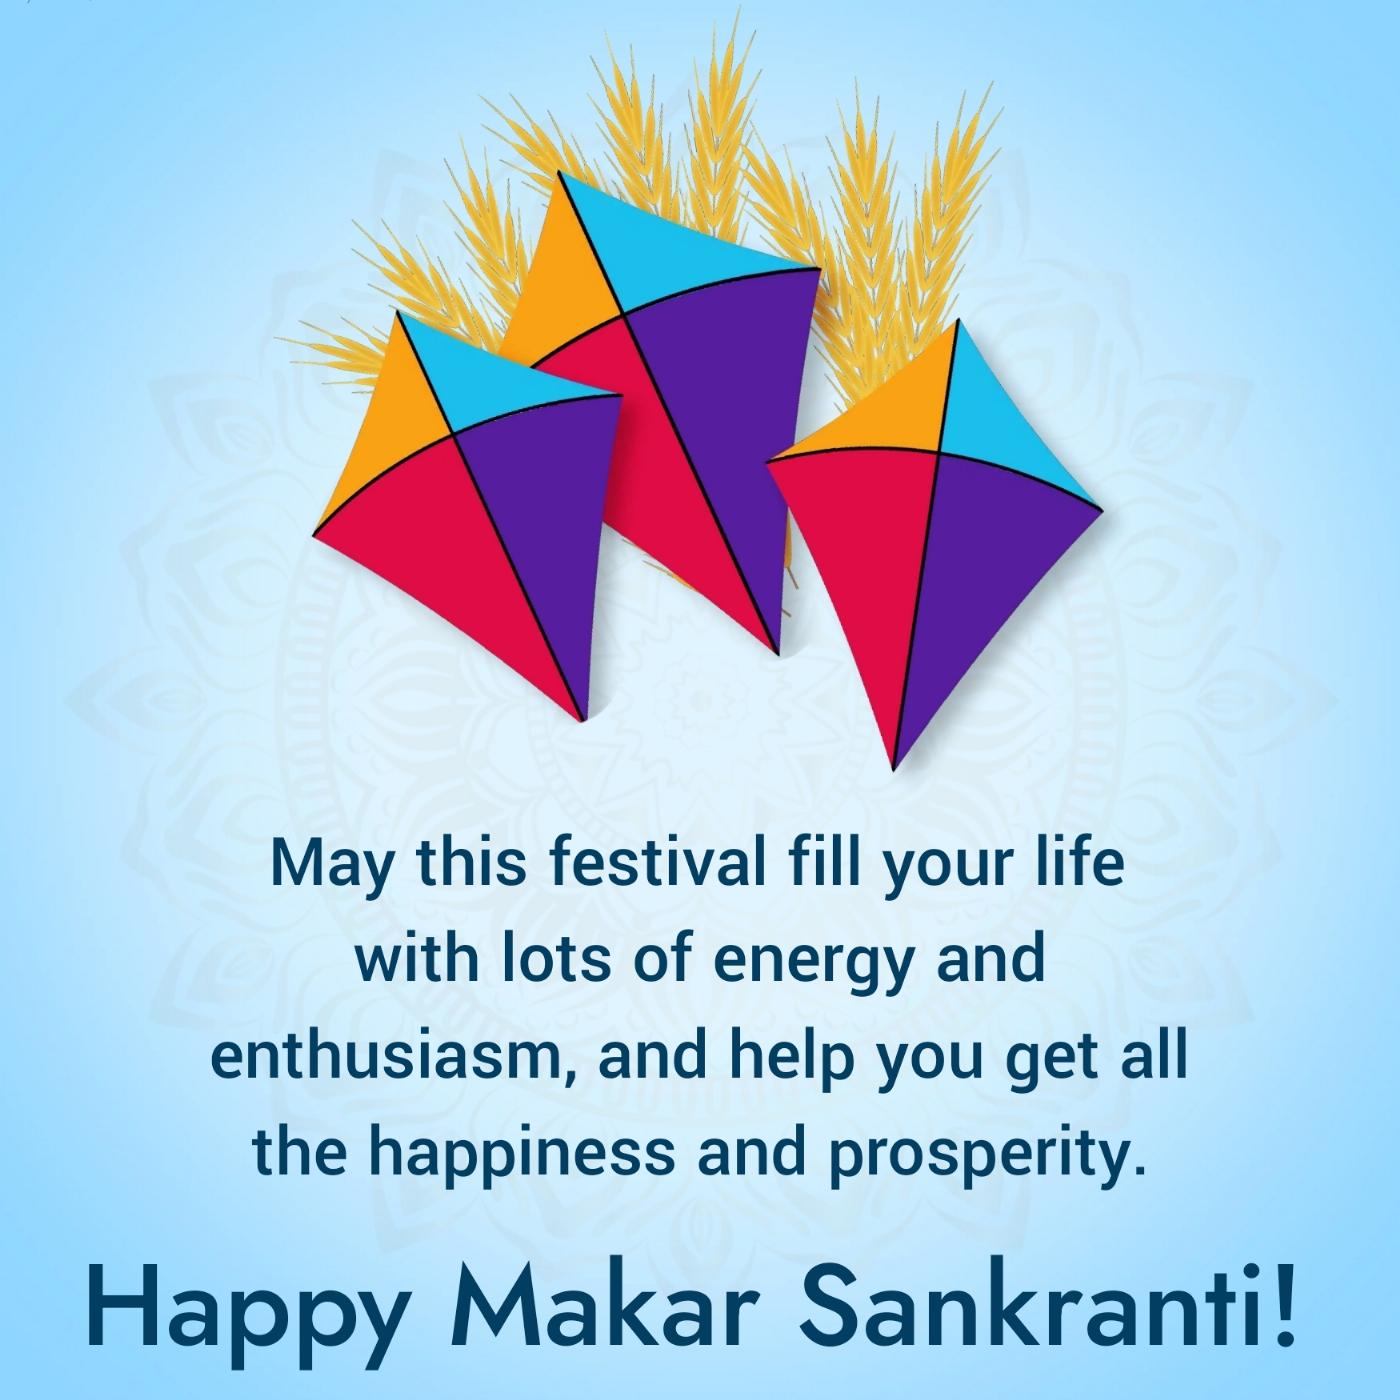 May this festival fill your life with lots of energy and enthusiasm